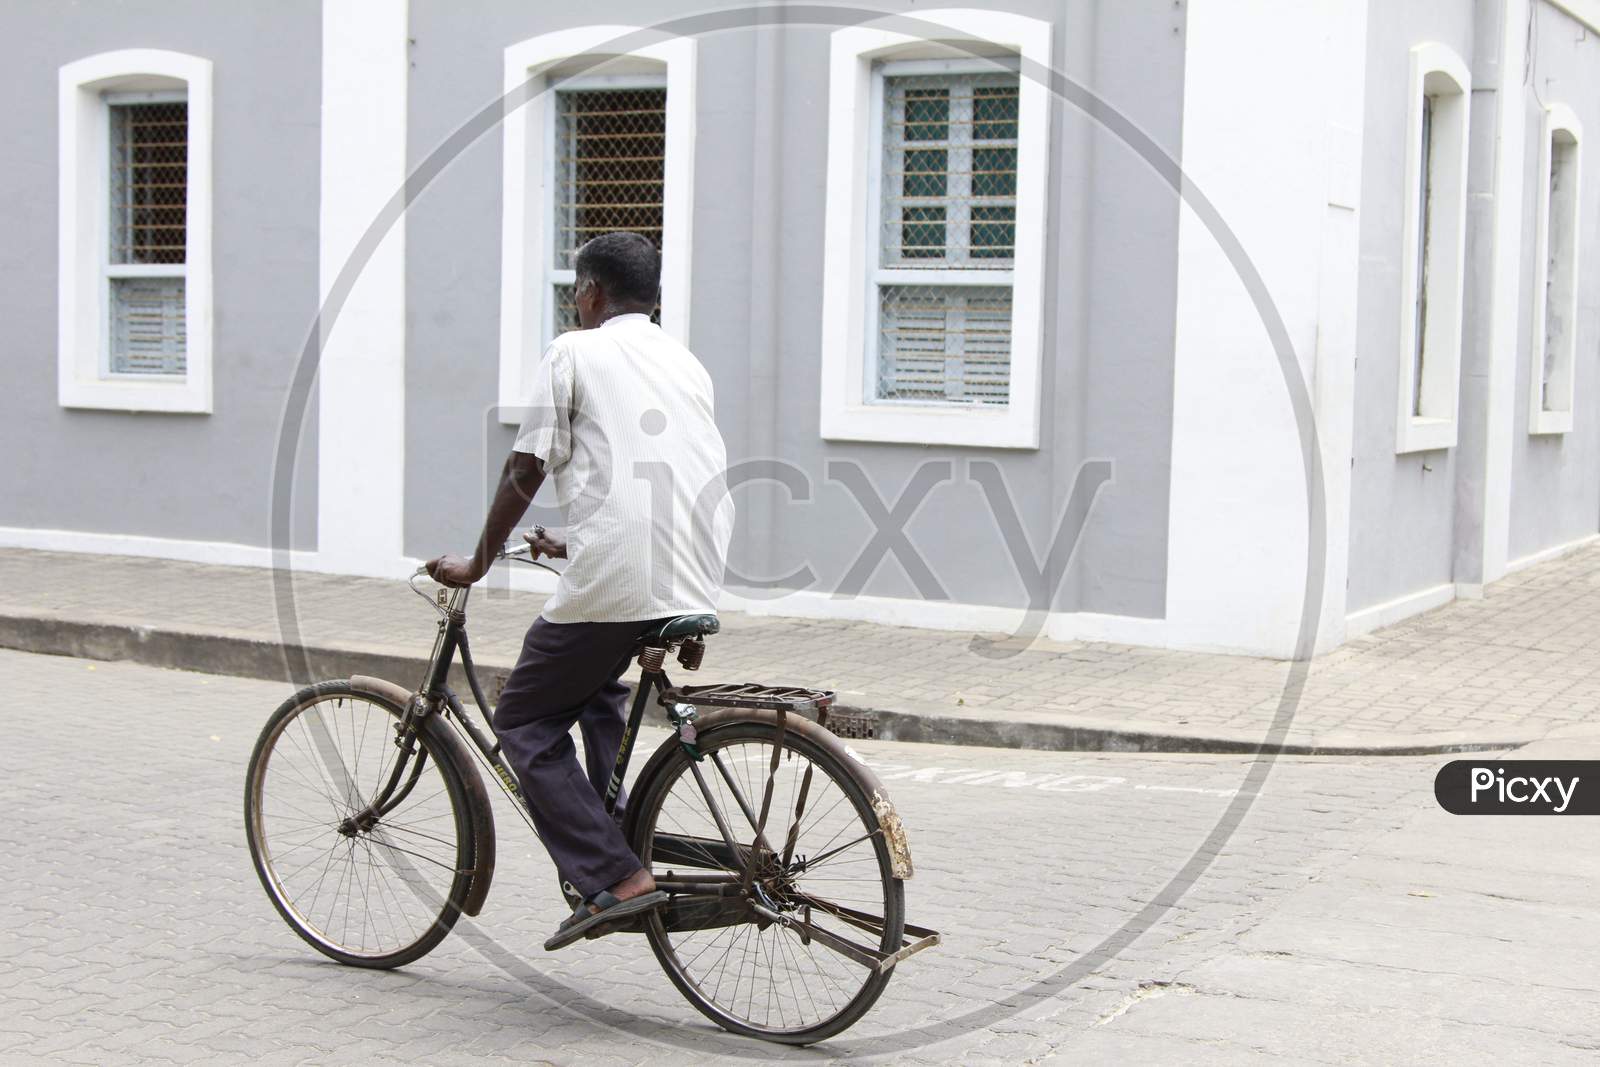 Indian man riding bicycle in the Pondicherry